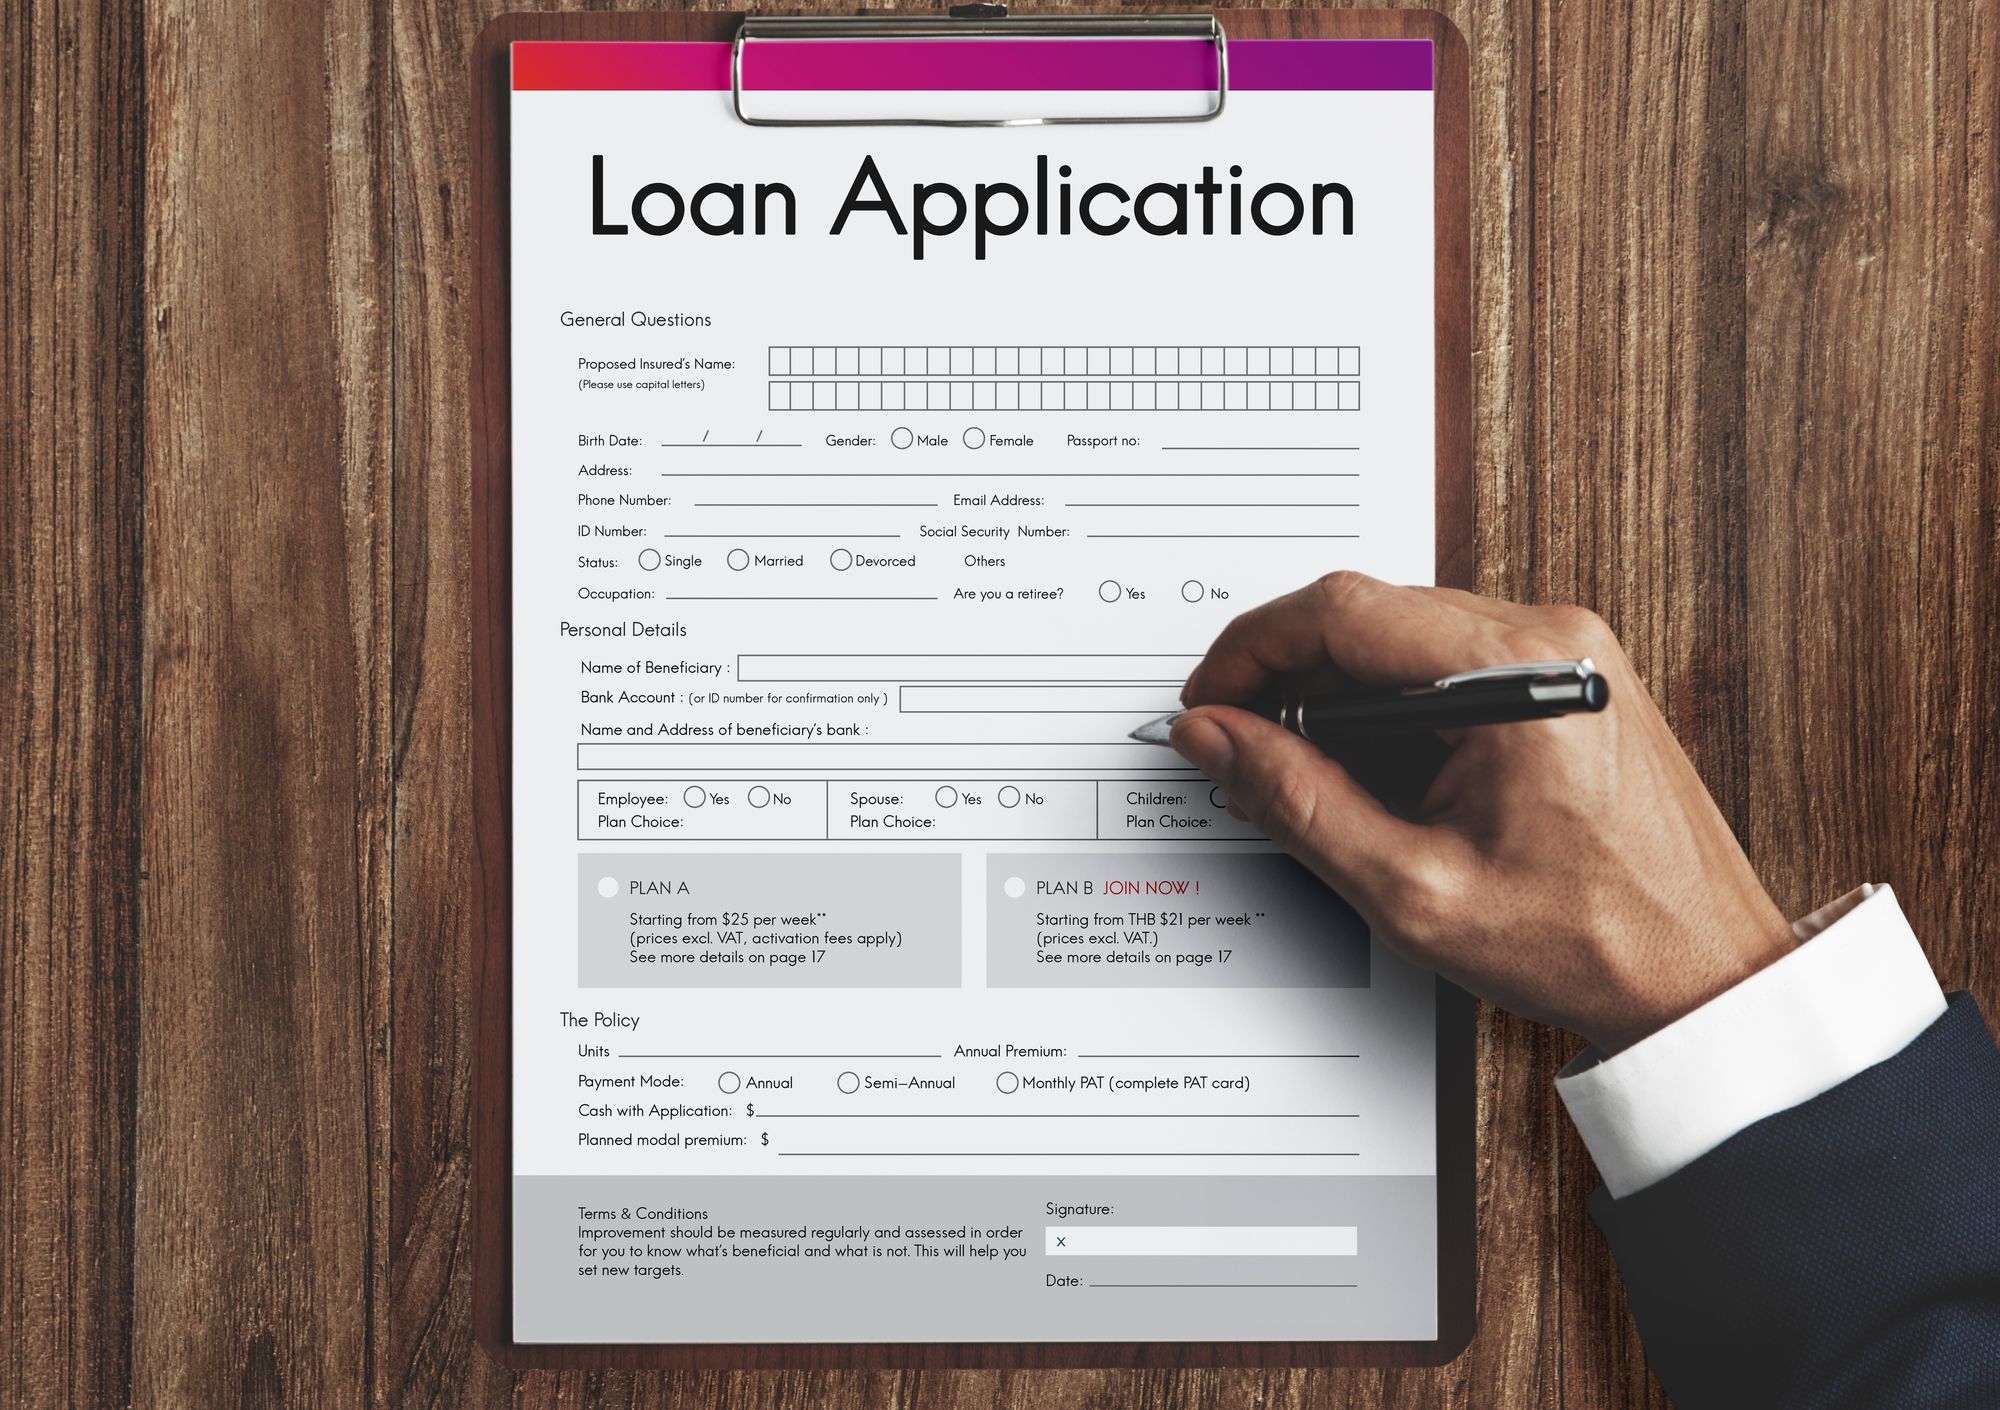 The Significance of National Lenders in Personal Finances